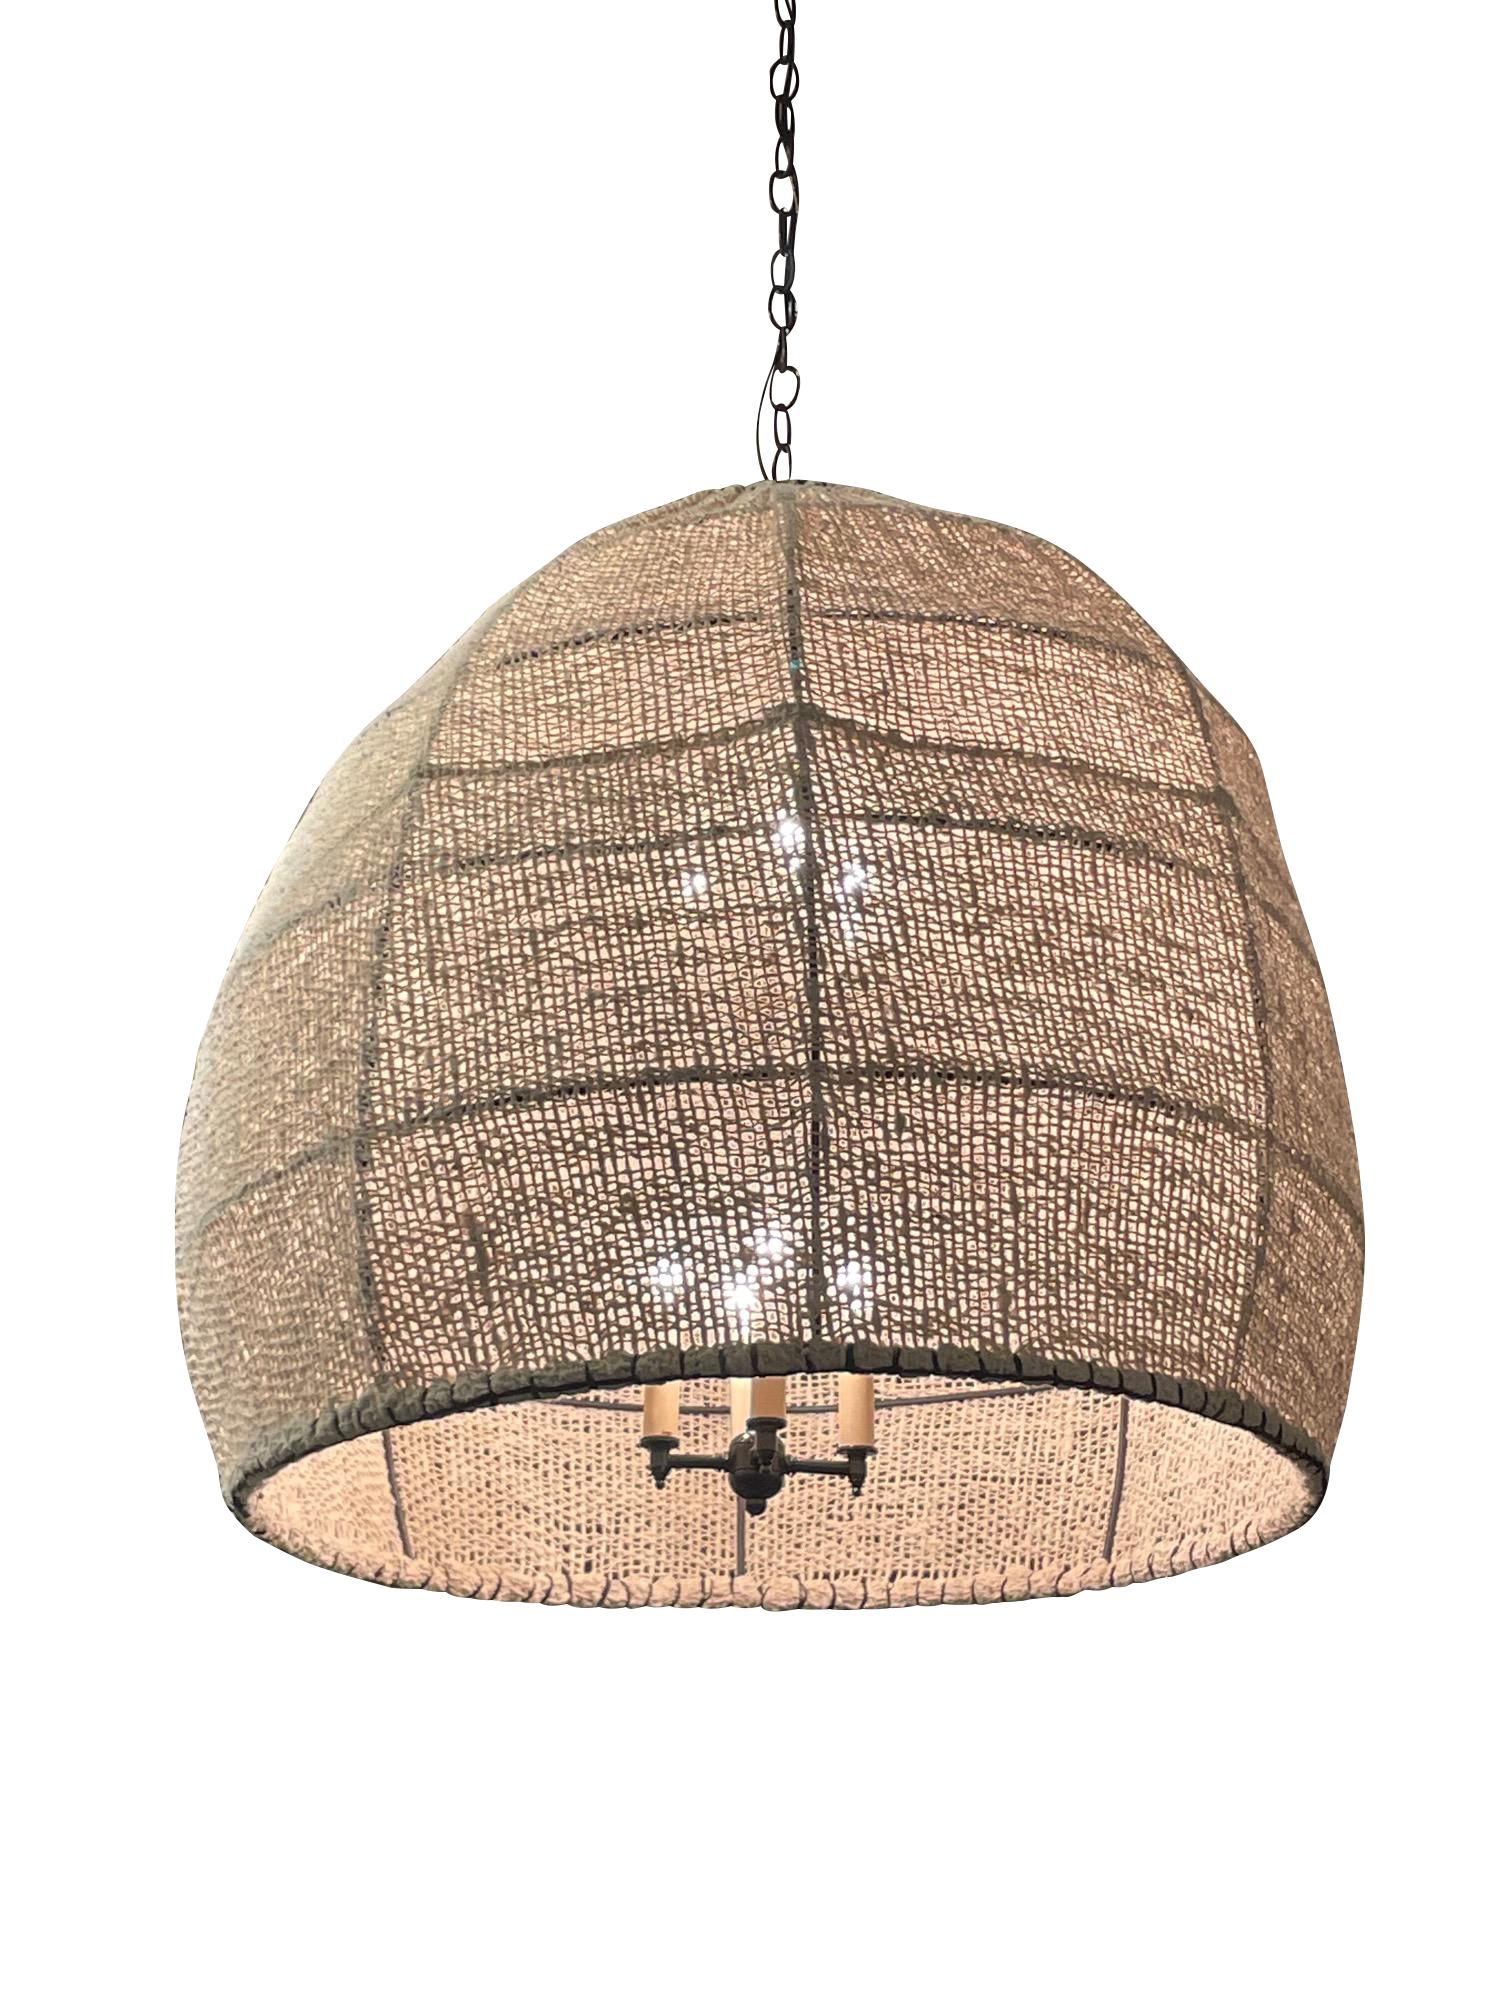 Contemporary Afghanistan textured cotton slub fabric shade over metal frame.  
Dome shaped chandelier.
Fixture alone measures 22